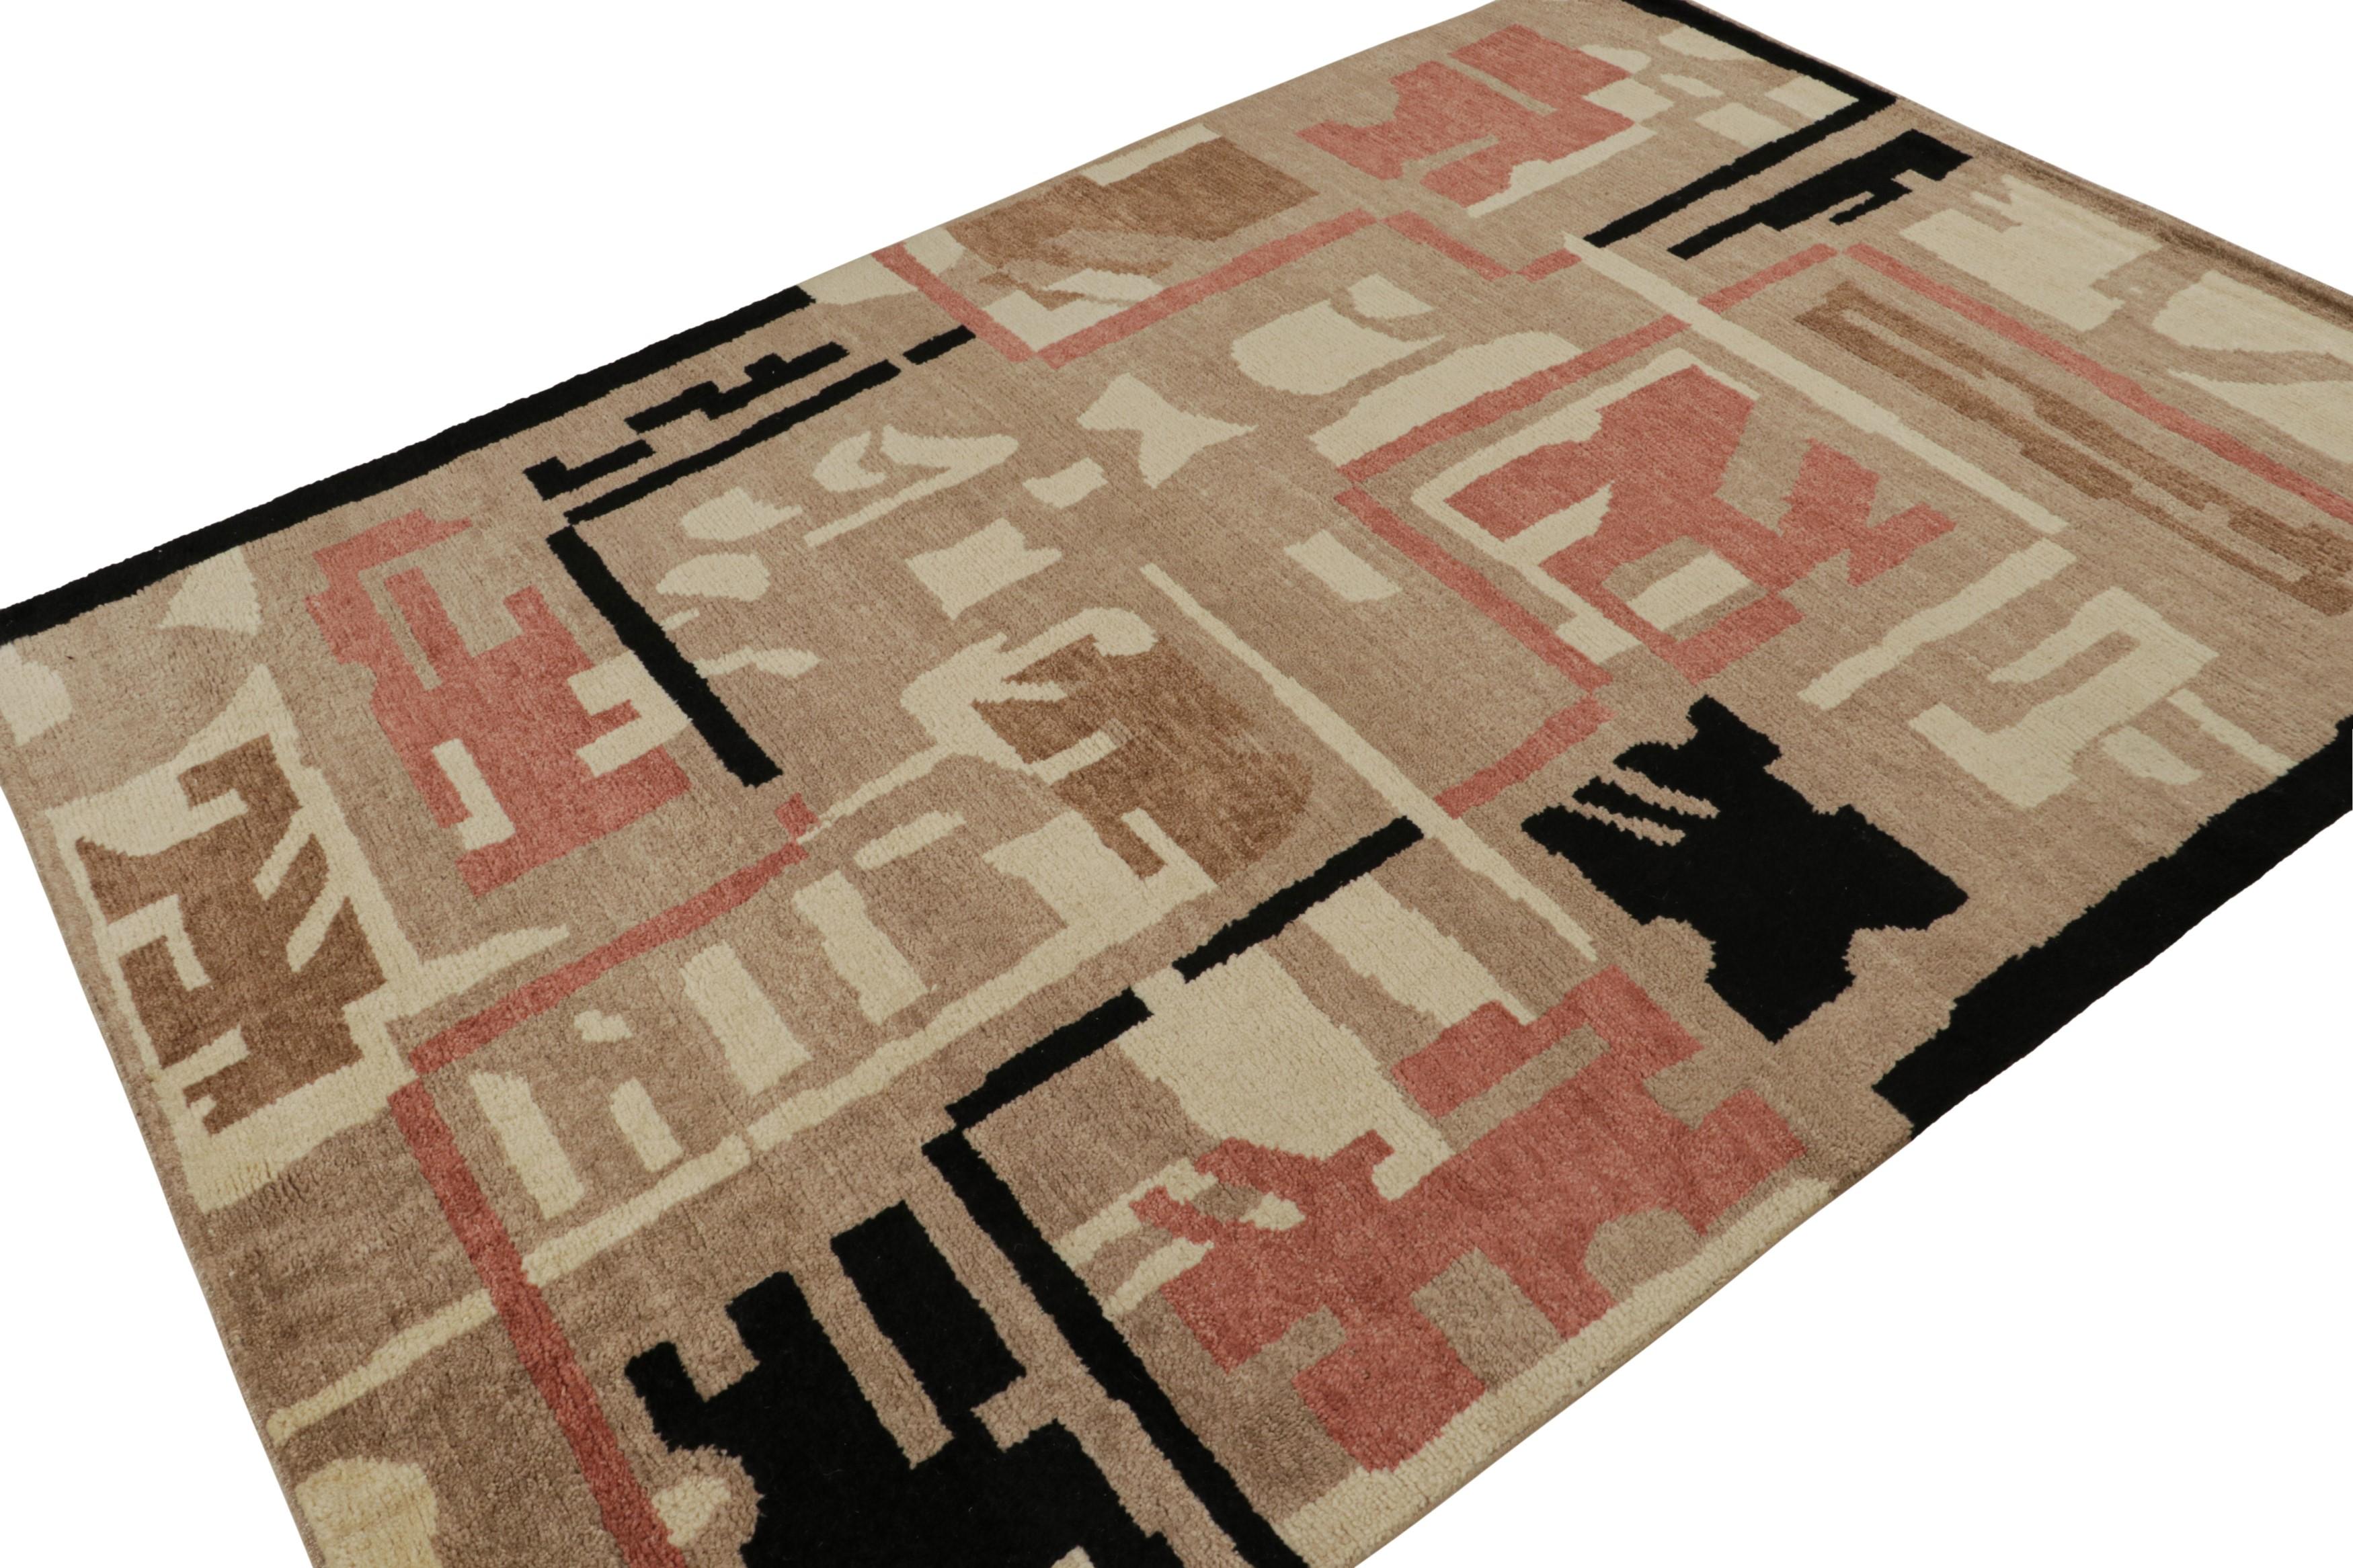 This 6x8 ode to French Art Deco rugs is the next addition to Rug & Kilim’s newly inspired Deco Collection. Hand-knotted in wool.

Further on the Design:  

This piece boasts the Deco style of the 1920s with geometric patterns in brown, red, white &